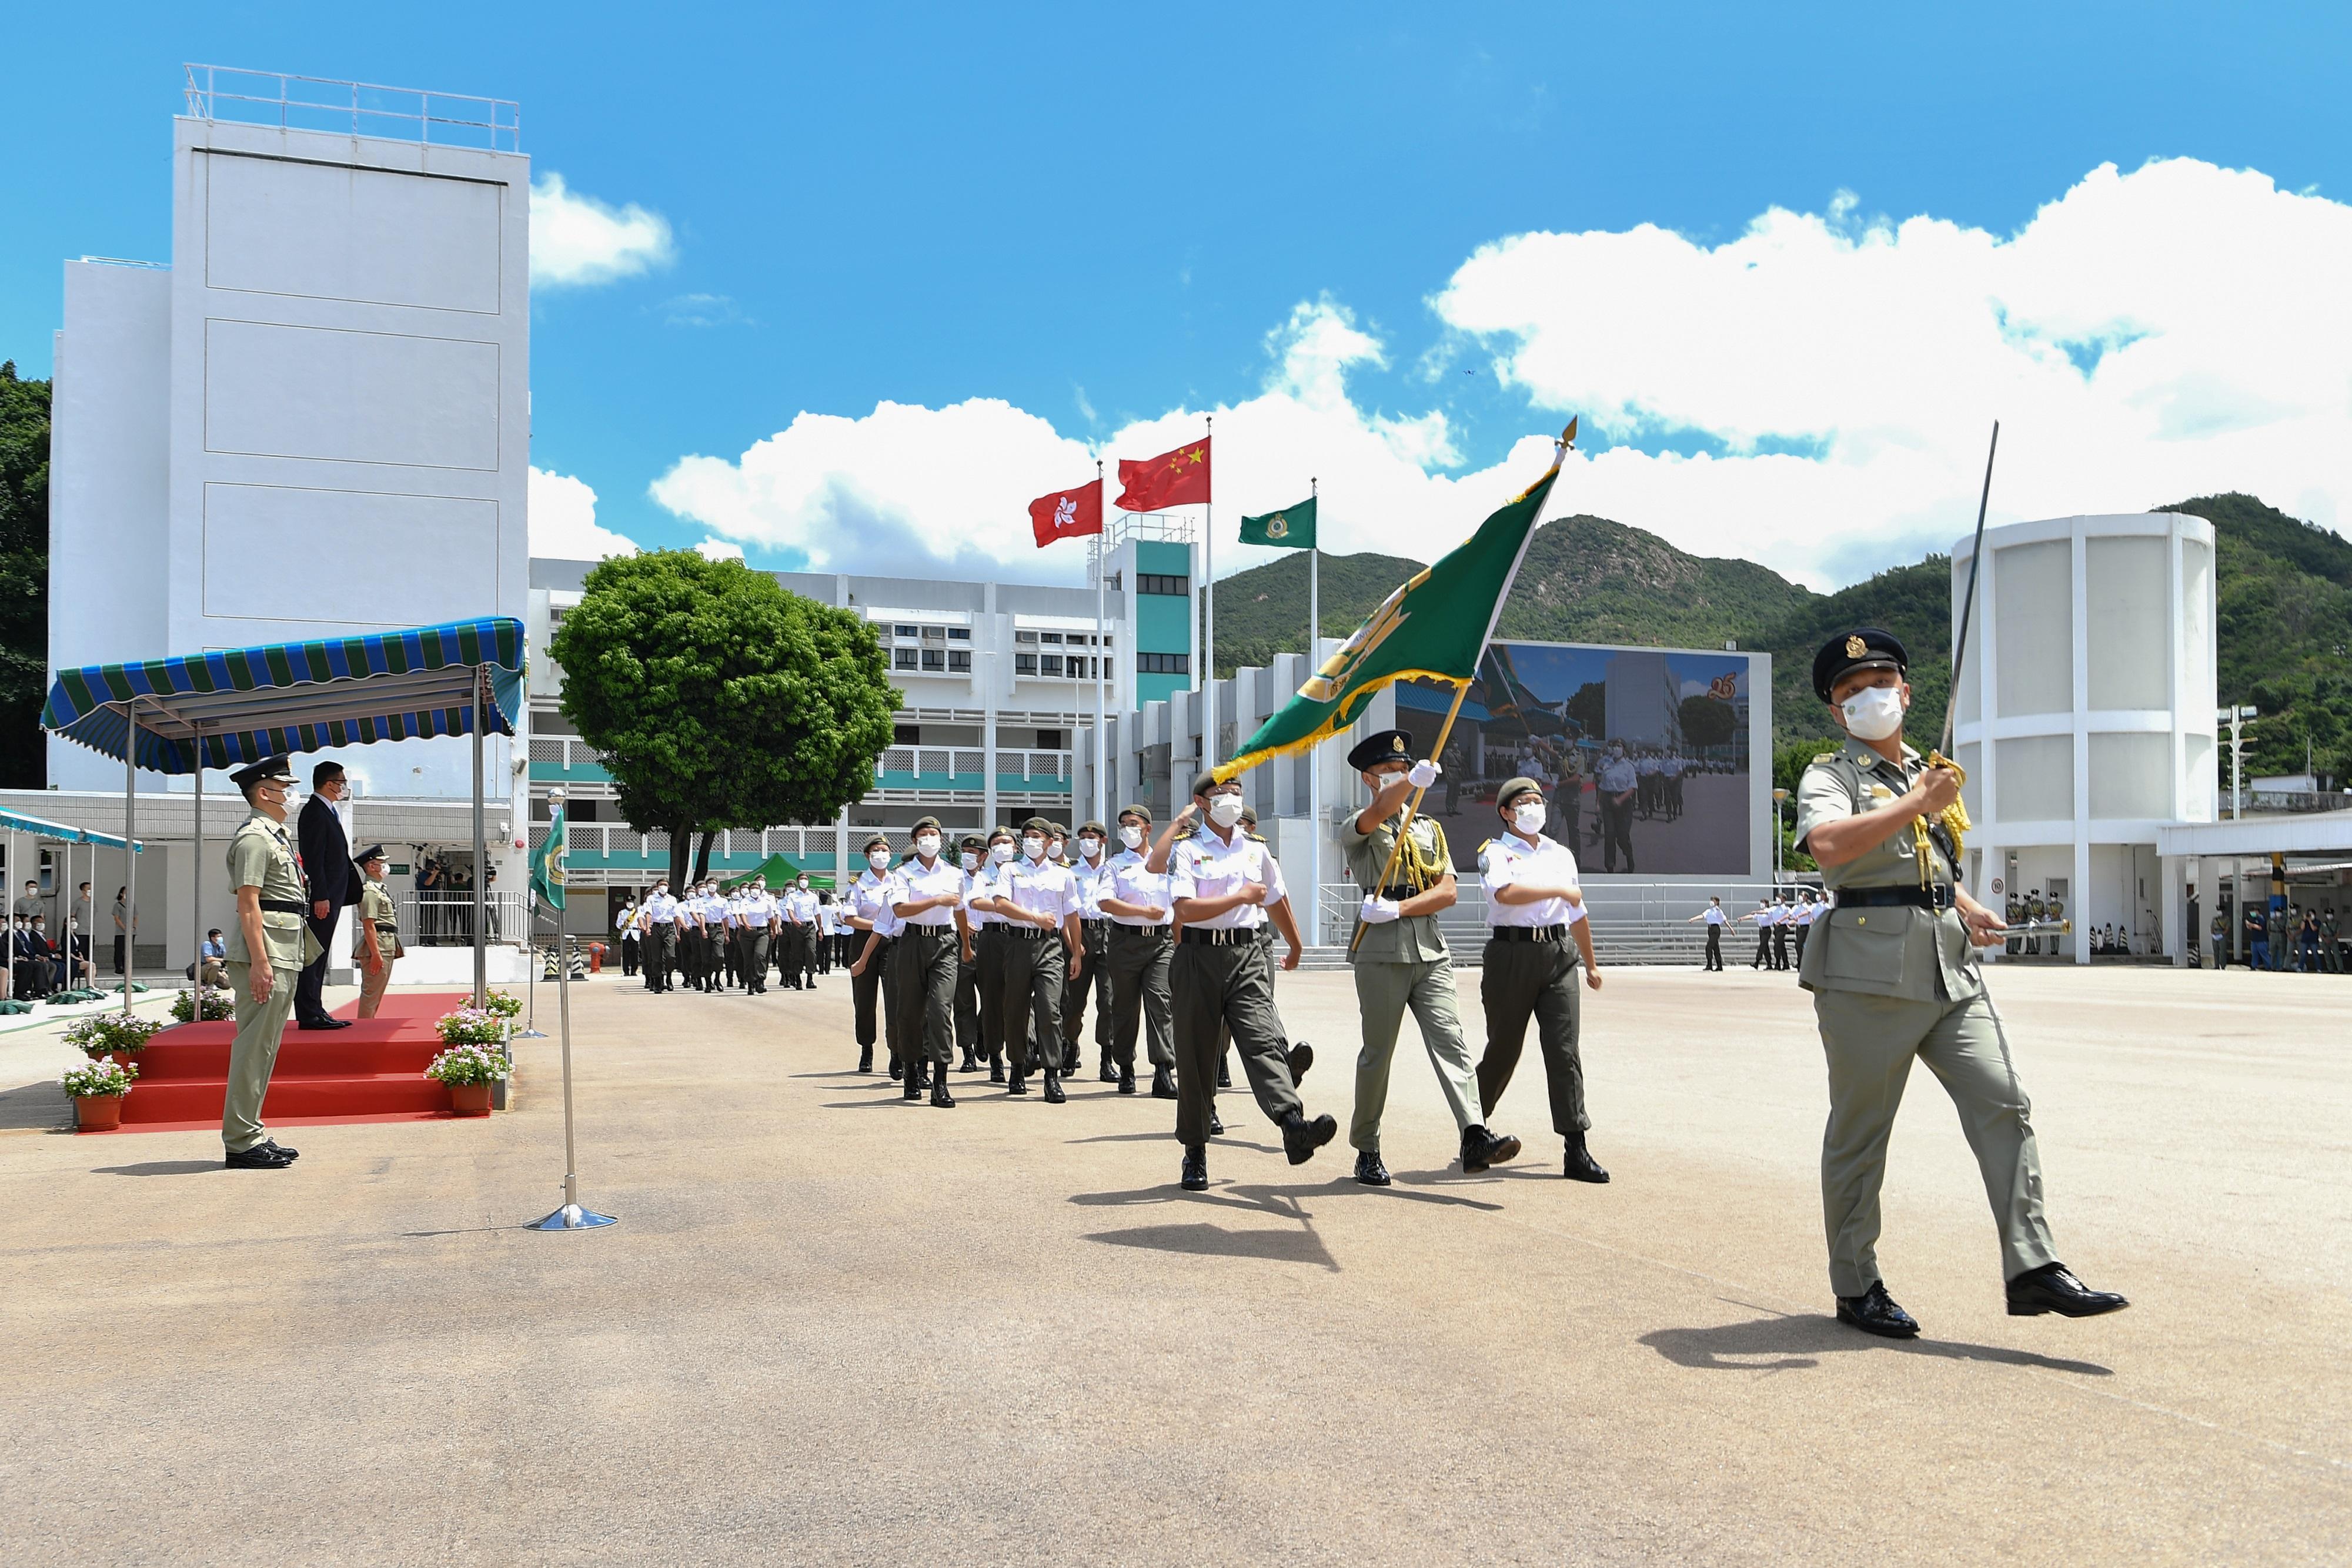 Hong Kong Customs ran the Customs Youth Leader Corps Summer Training Camp 2022 this week (August 15 to 19) and the graduation parade was held today (August 20) at the Hong Kong Customs College. Photo shows the graduates performing "zheng bu" (a specific type of marching step) and marching past the review stand.